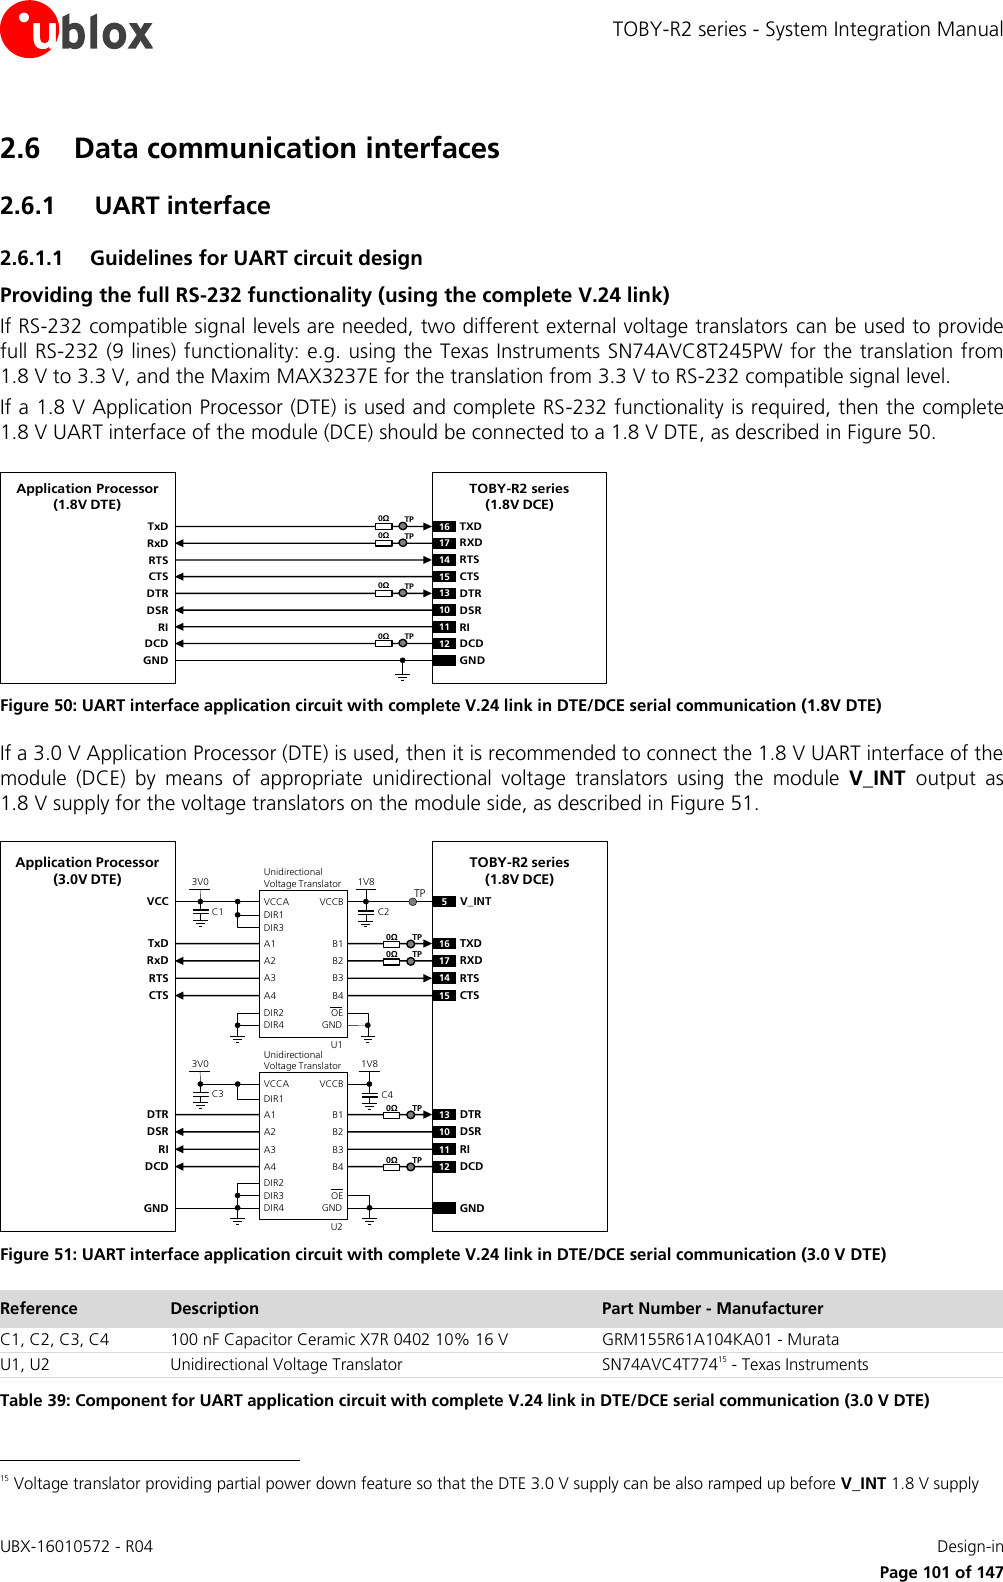 TOBY-R2 series - System Integration Manual UBX-16010572 - R04    Design-in     Page 101 of 147 2.6 Data communication interfaces 2.6.1 UART interface 2.6.1.1 Guidelines for UART circuit design Providing the full RS-232 functionality (using the complete V.24 link) If RS-232 compatible signal levels are needed, two different external voltage translators  can be used to provide full RS-232 (9 lines) functionality: e.g. using the Texas Instruments SN74AVC8T245PW for the translation from 1.8 V to 3.3 V, and the Maxim MAX3237E for the translation from 3.3 V to RS-232 compatible signal level. If a 1.8 V Application Processor (DTE) is used and complete RS-232 functionality is required, then the complete 1.8 V UART interface of the module (DCE) should be connected to a 1.8 V DTE, as described in Figure 50. TxDApplication Processor(1.8V DTE)RxDRTSCTSDTRDSRRIDCDGNDTOBY-R2 series (1.8V DCE)16 TXD13 DTR17 RXD14 RTS15 CTS10 DSR11 RI12 DCDGND0ΩTP0ΩTP0ΩTP0ΩTP Figure 50: UART interface application circuit with complete V.24 link in DTE/DCE serial communication (1.8V DTE) If a 3.0 V Application Processor (DTE) is used, then it is recommended to connect the 1.8 V UART interface of the module  (DCE)  by  means  of  appropriate  unidirectional  voltage  translators  using  the  module  V_INT  output  as 1.8 V supply for the voltage translators on the module side, as described in Figure 51. 5V_INTTxDApplication Processor(3.0V DTE)RxDRTSCTSDTRDSRRIDCDGNDTOBY-R2 series (1.8V DCE)16 TXD13 DTR17 RXD14 RTS15 CTS10 DSR11 RI12 DCDGND1V8B1 A1GNDU1B3A3VCCBVCCAUnidirectionalVoltage TranslatorC1 C23V0DIR3DIR2 OEDIR1VCCB2 A2B4A4DIR41V8B1 A1GNDU2B3A3VCCBVCCAUnidirectionalVoltage TranslatorC3 C43V0DIR1DIR3 OEB2 A2B4A4DIR4DIR2TP0ΩTP0ΩTP0ΩTP0ΩTP Figure 51: UART interface application circuit with complete V.24 link in DTE/DCE serial communication (3.0 V DTE) Reference Description Part Number - Manufacturer C1, C2, C3, C4 100 nF Capacitor Ceramic X7R 0402 10% 16 V GRM155R61A104KA01 - Murata U1, U2 Unidirectional Voltage Translator SN74AVC4T77415 - Texas Instruments Table 39: Component for UART application circuit with complete V.24 link in DTE/DCE serial communication (3.0 V DTE)                                                       15 Voltage translator providing partial power down feature so that the DTE 3.0 V supply can be also ramped up before V_INT 1.8 V supply 